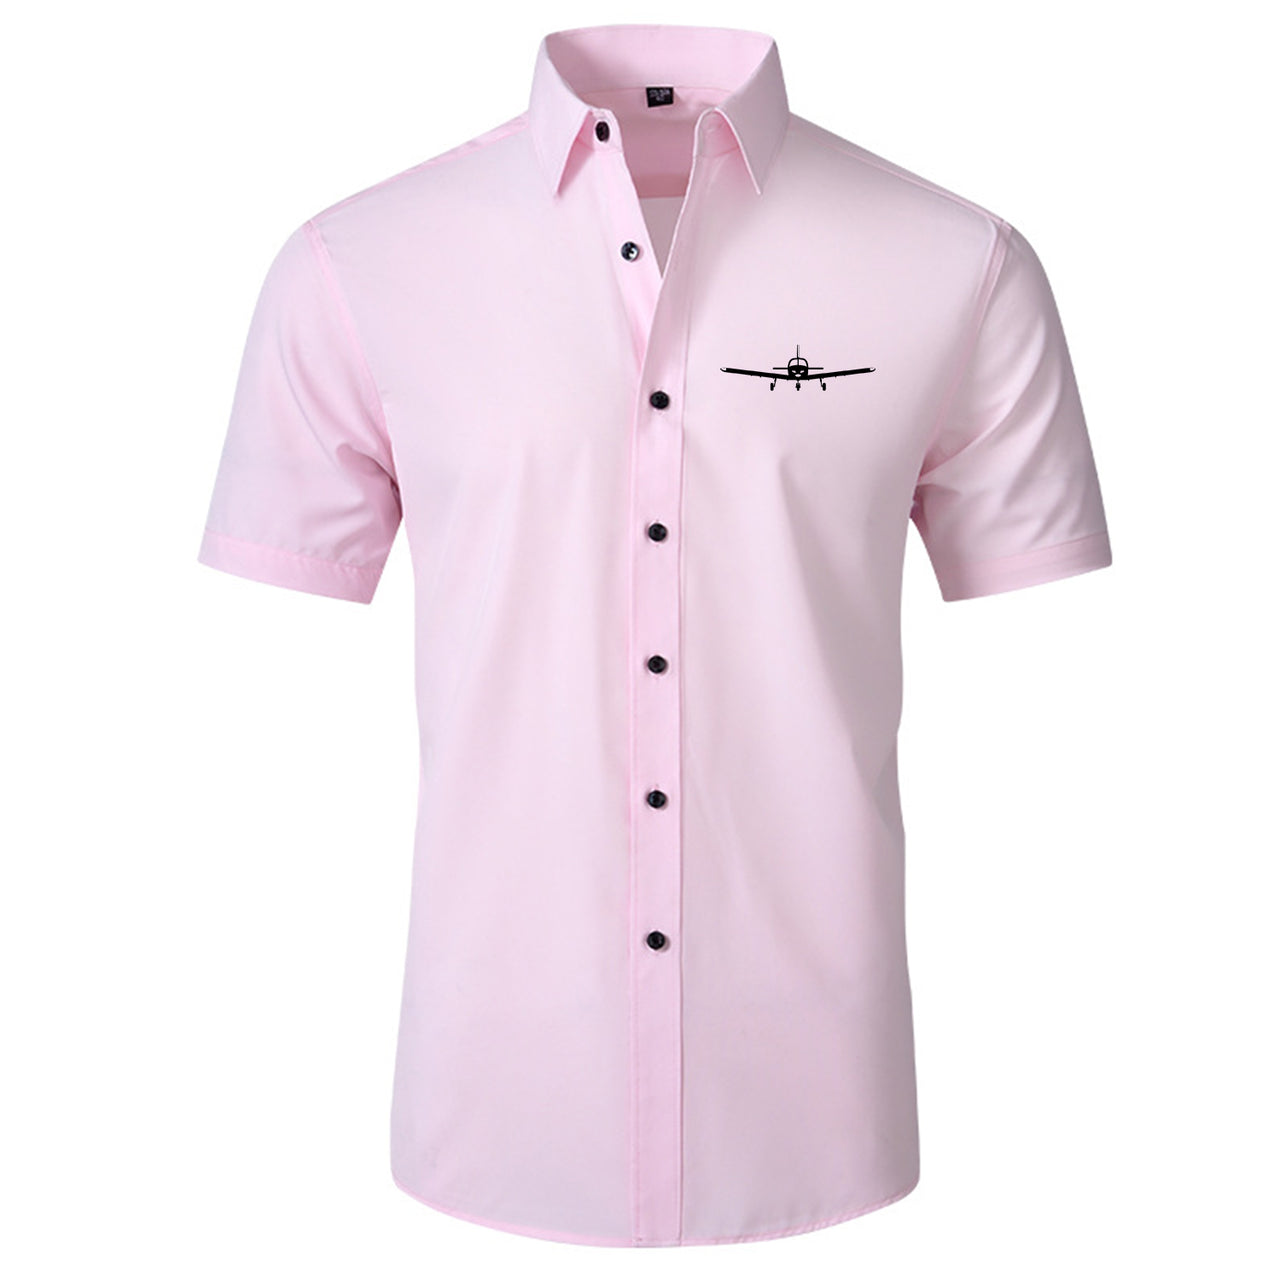 Piper PA28 Silhouette Plane Designed Short Sleeve Shirts